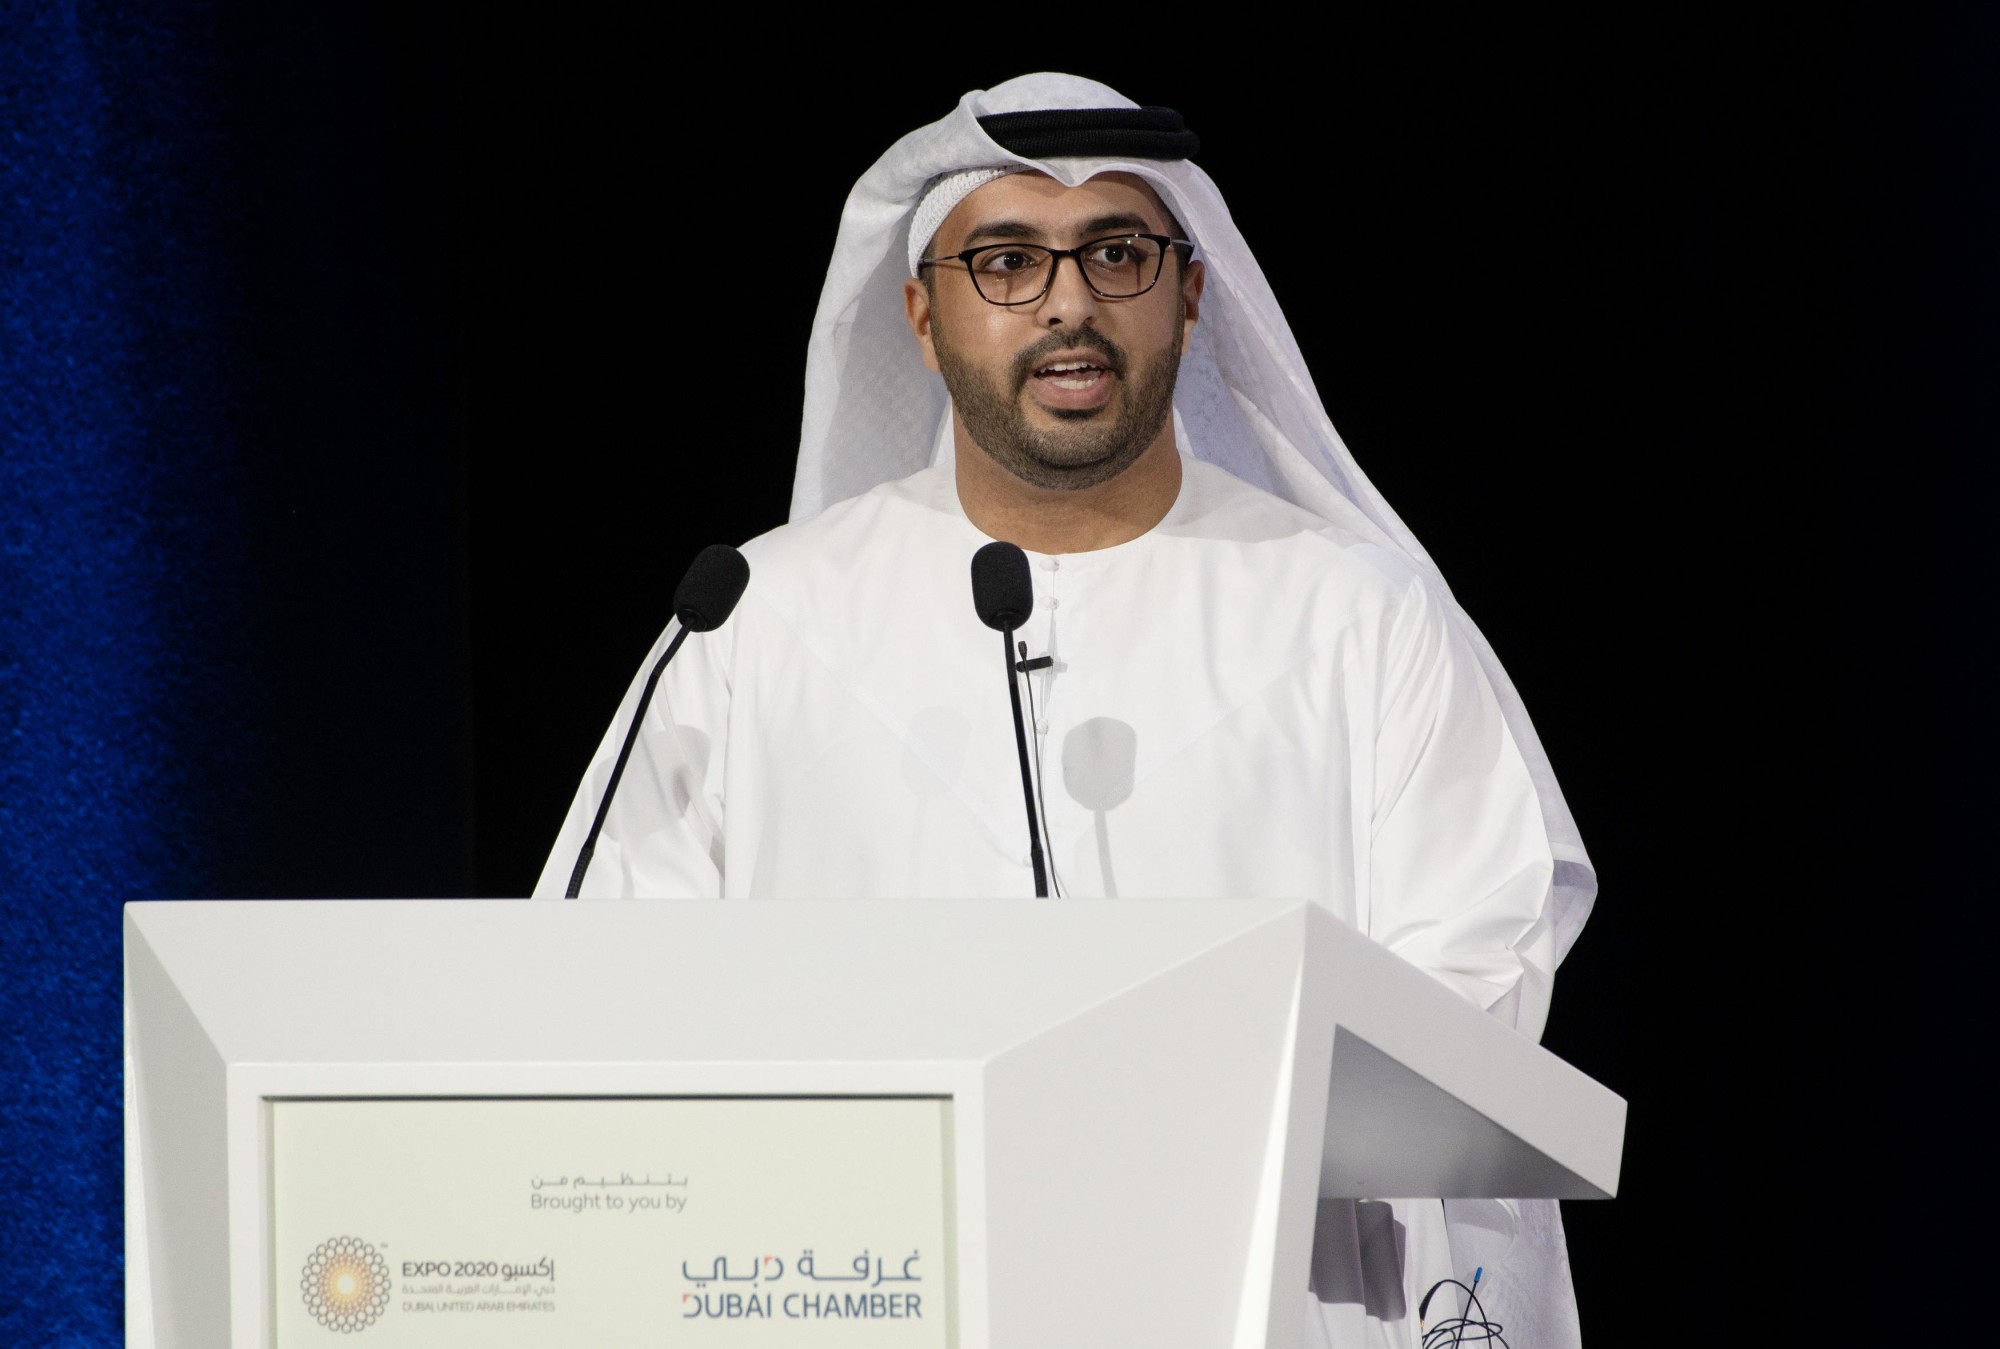 Ahmed AlDarei Space Technology Researcher UAE Space Agency during the Space Business Forum Web Image m5168